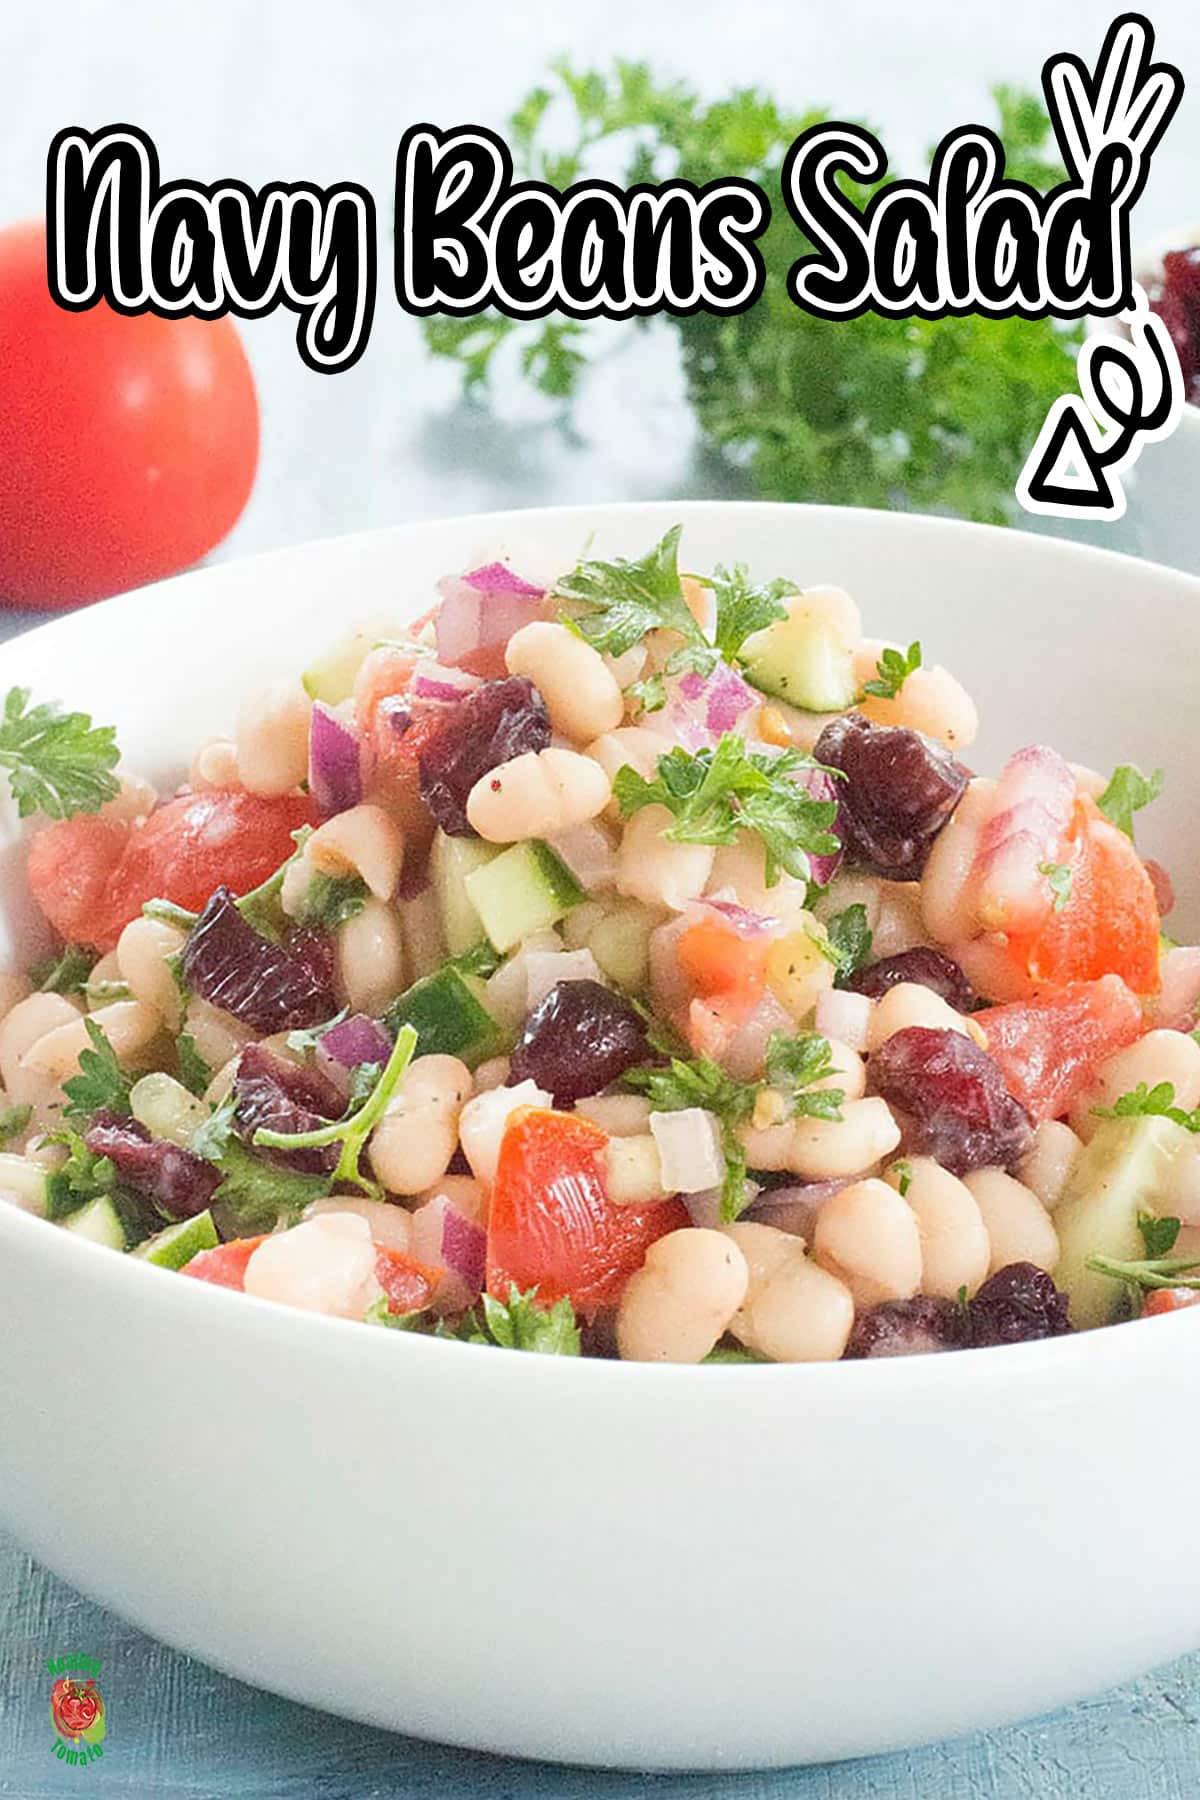 Front view of a white bowl filled with navy beans salad